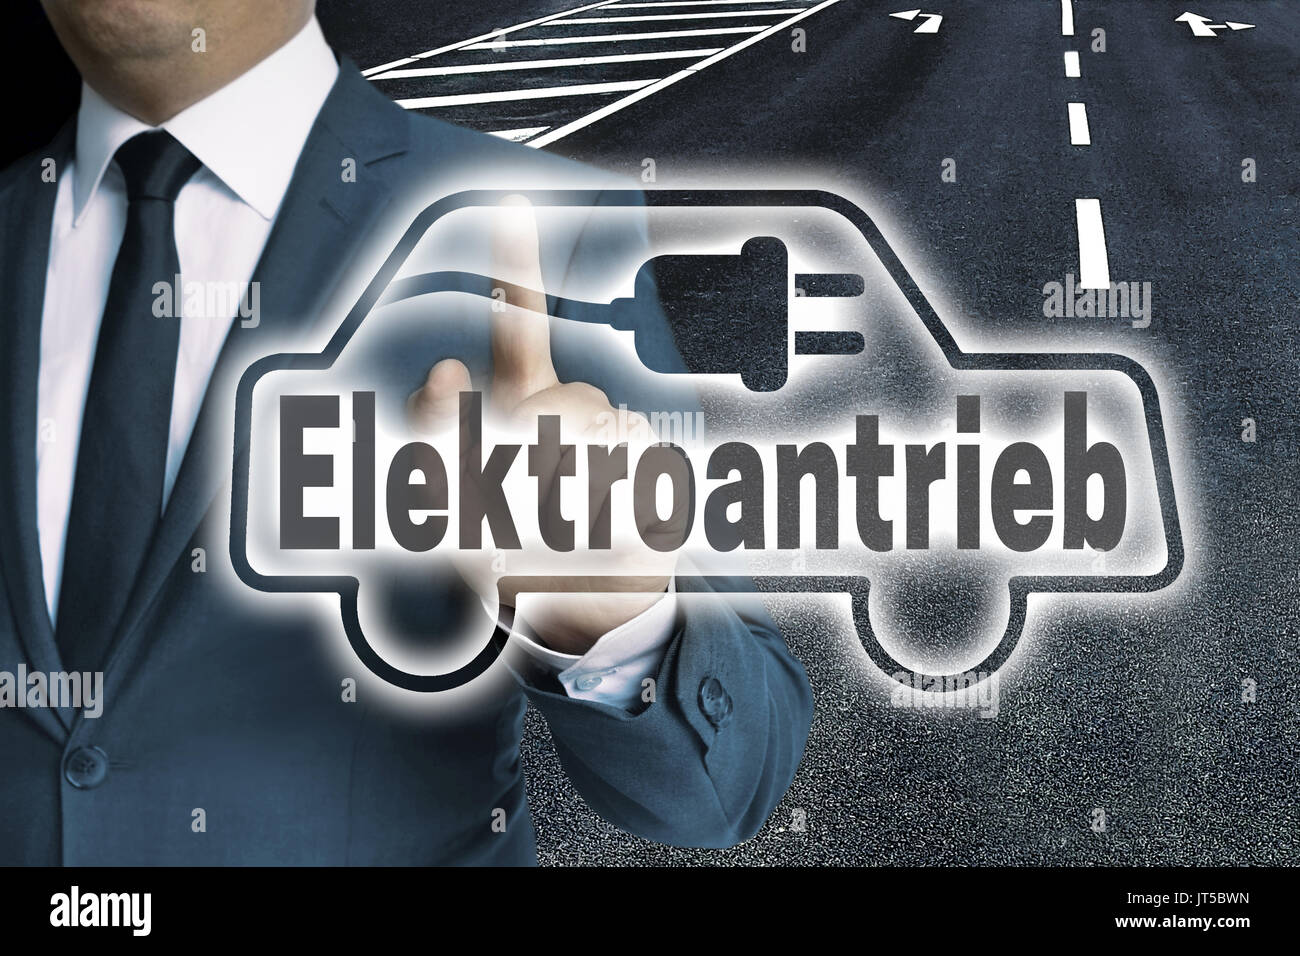 Elektroantrieb (in german Electric drive) car touchscreen is man-operated concept. Stock Photo